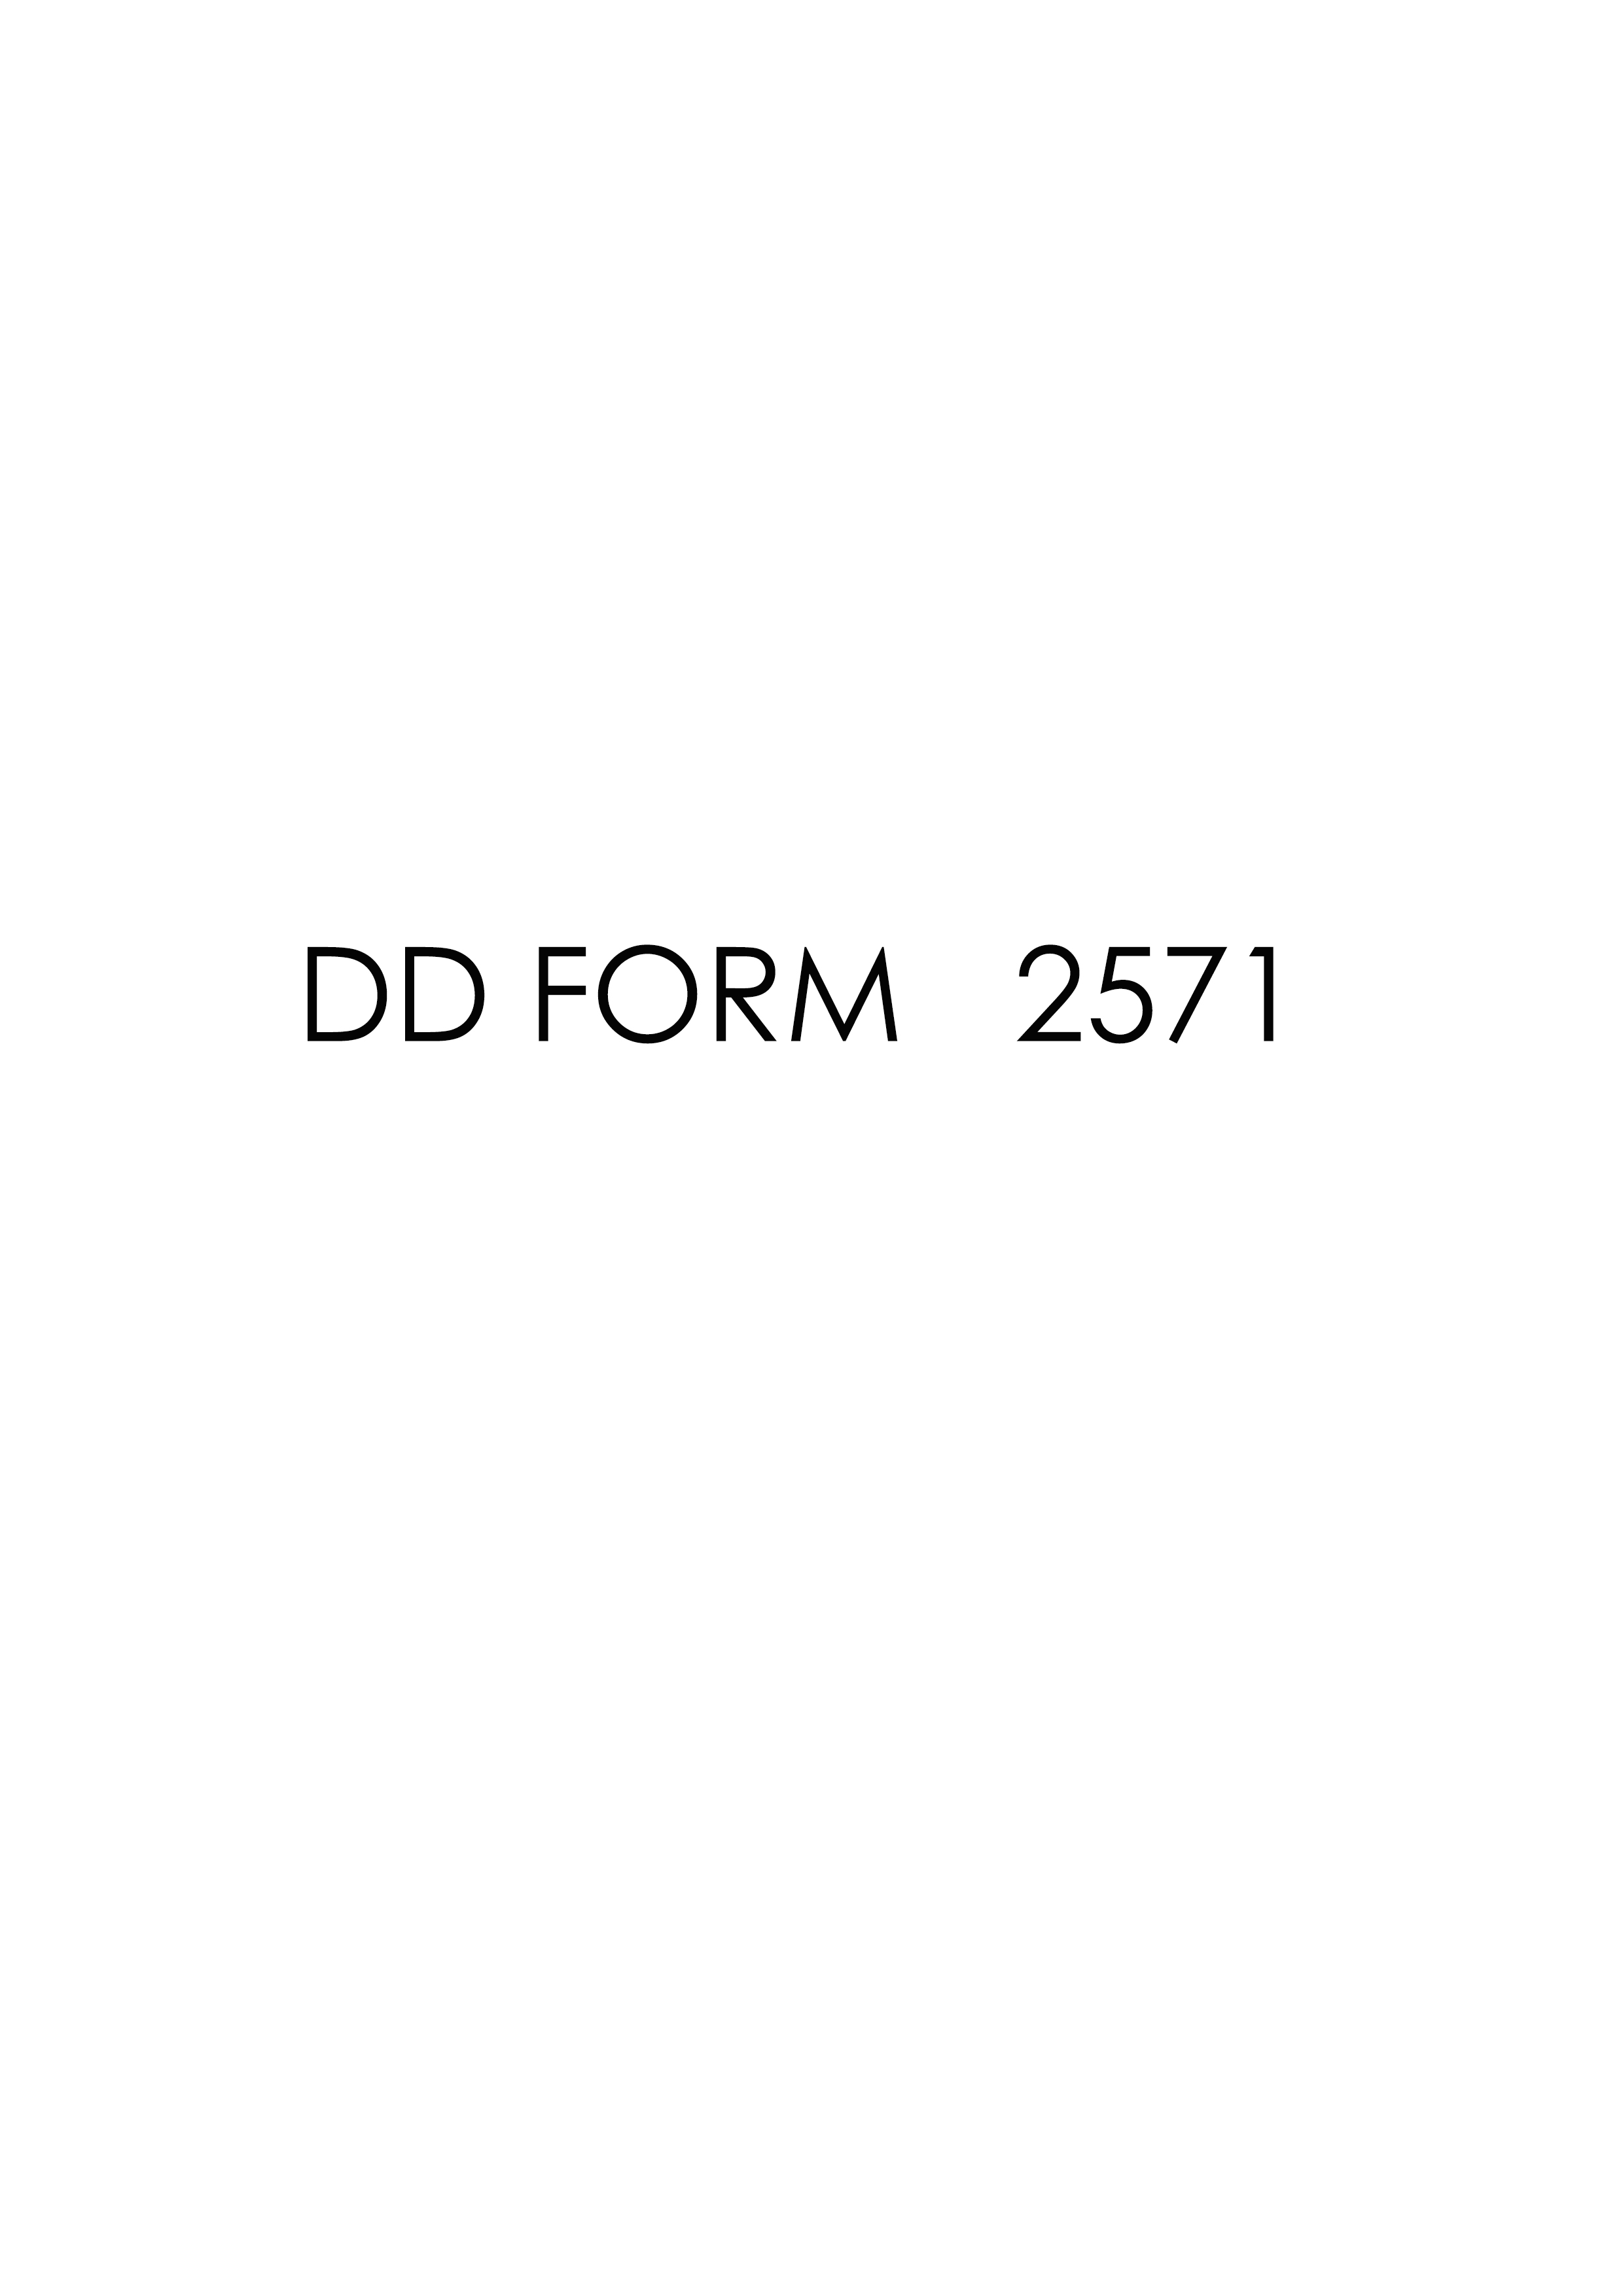 Download Fillable dd Form 2571